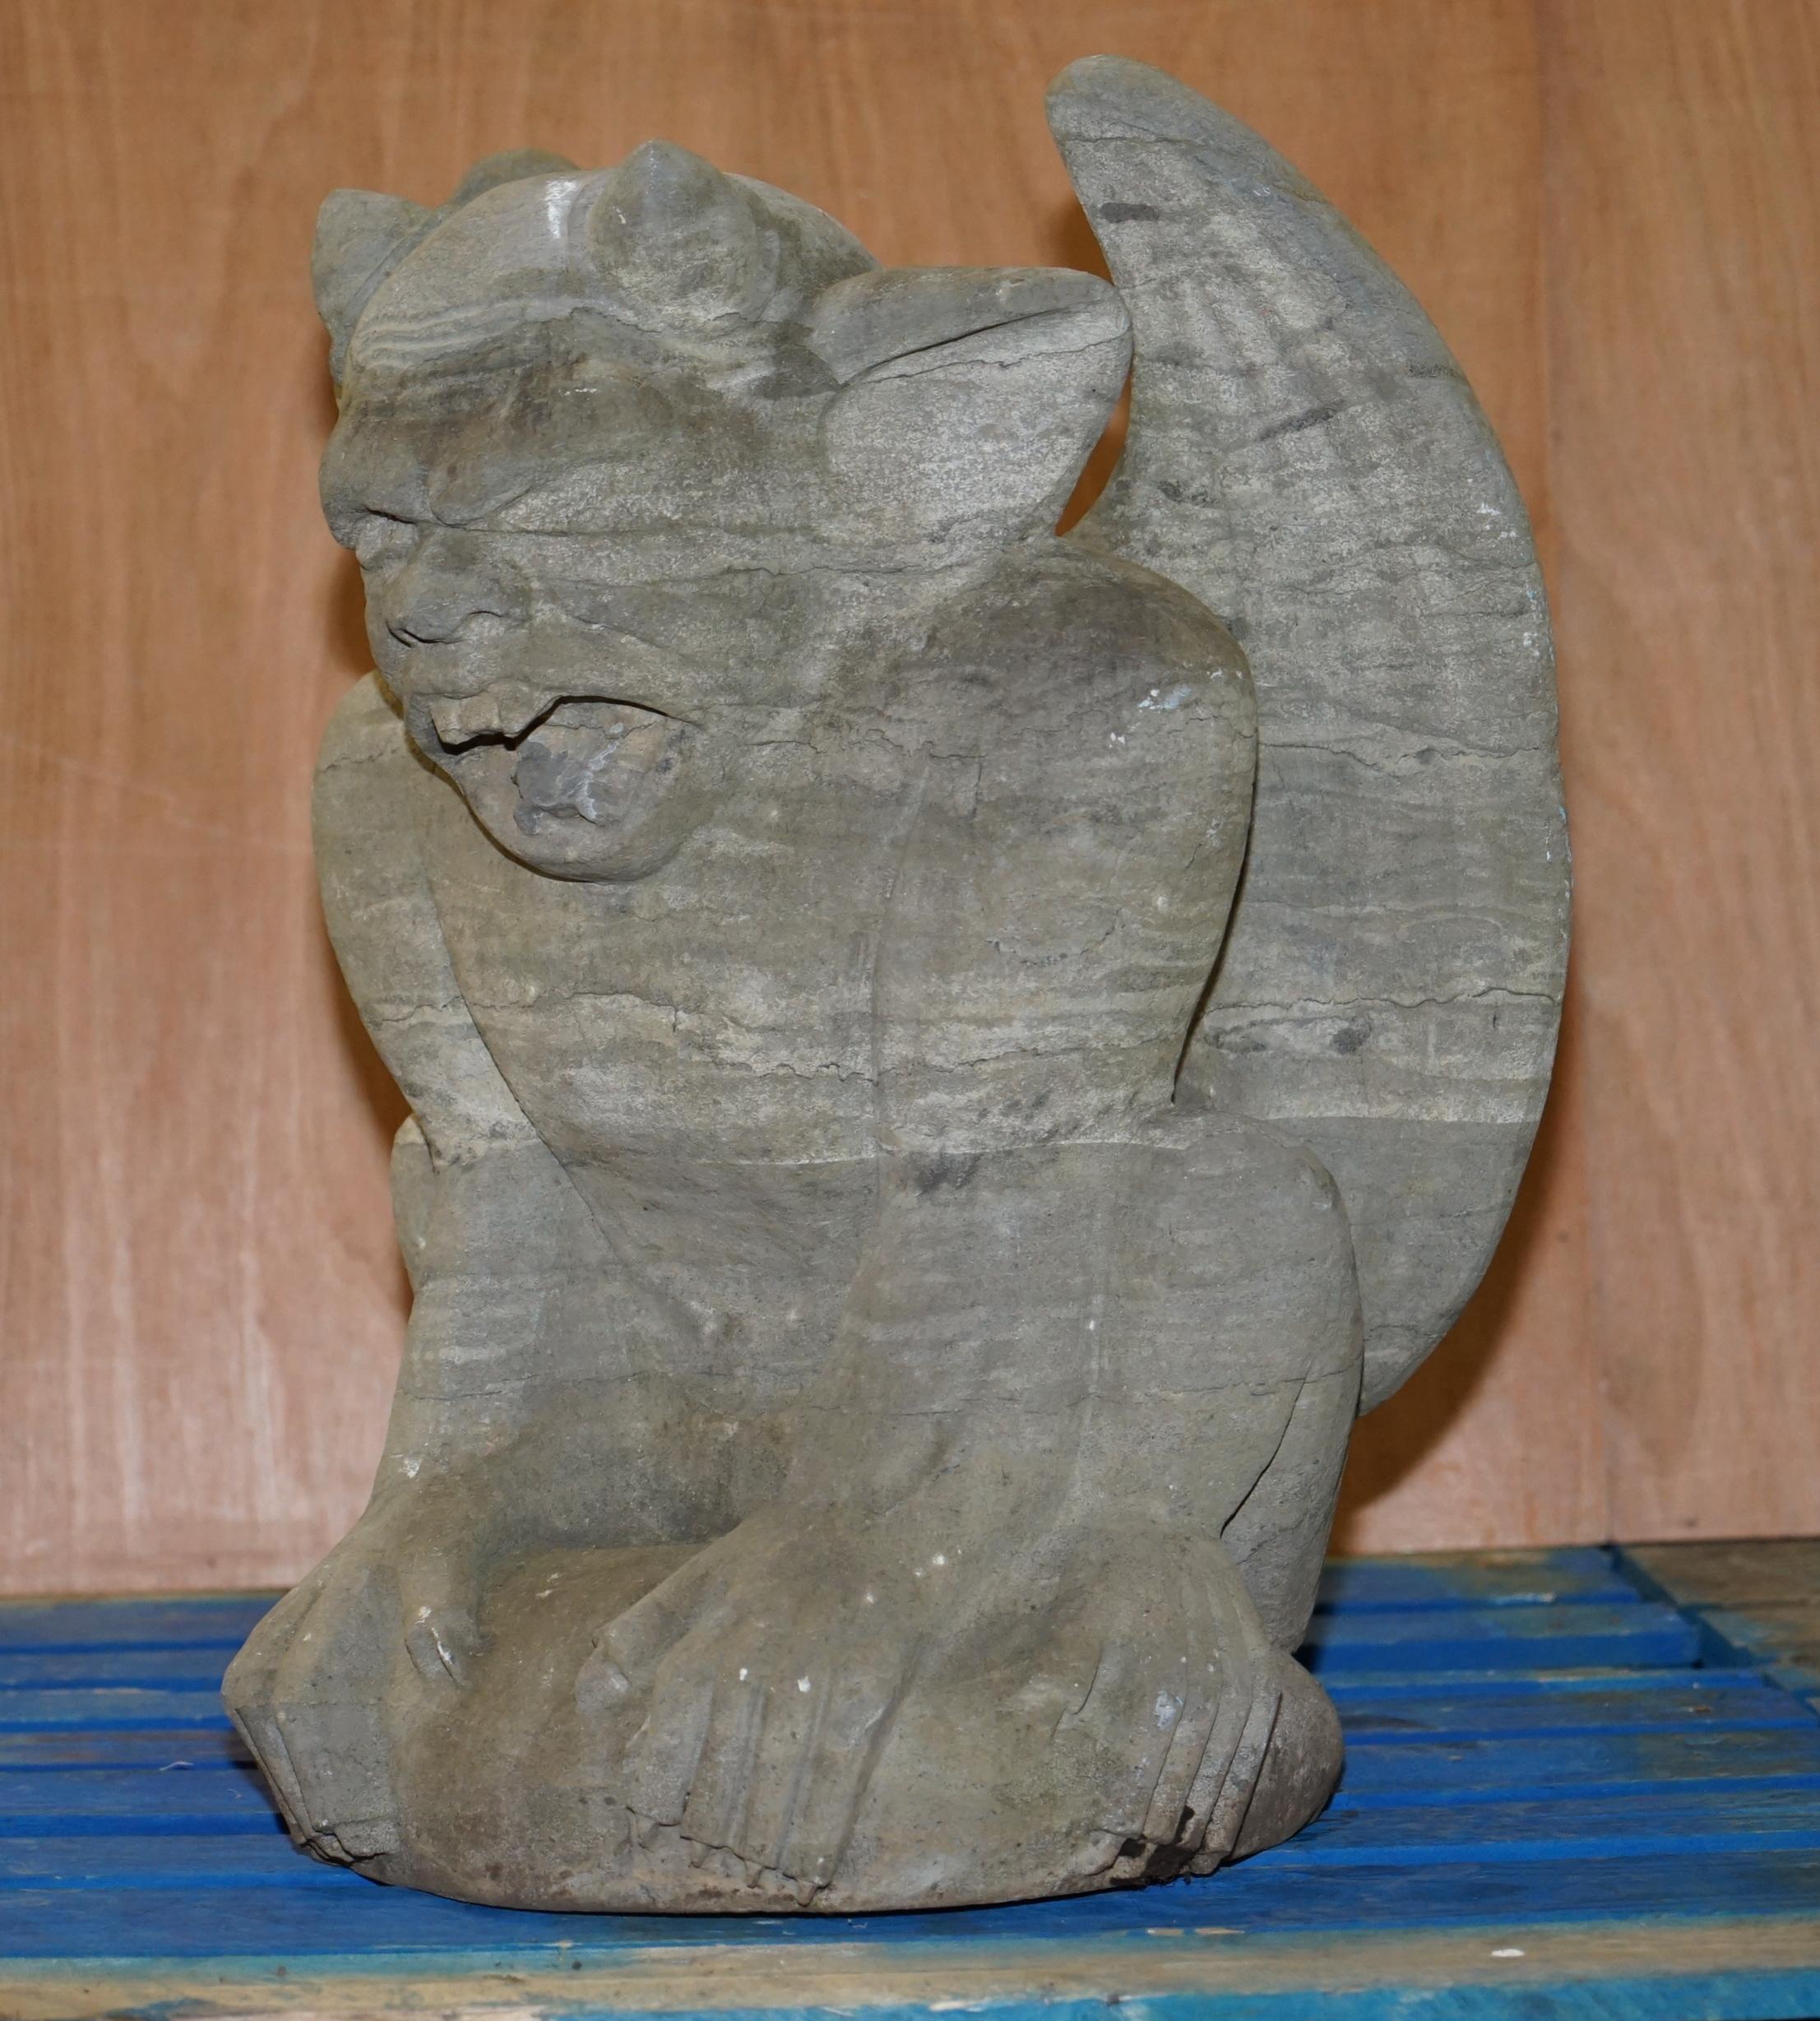 We are delighted to offer for sale this exquisite and insanely heavy pair of original vintage hand carved granite rock Gargoyle statues

These are the perfect size for sitting on top of pedestals, ideally at a gate post or driveway entrance, they